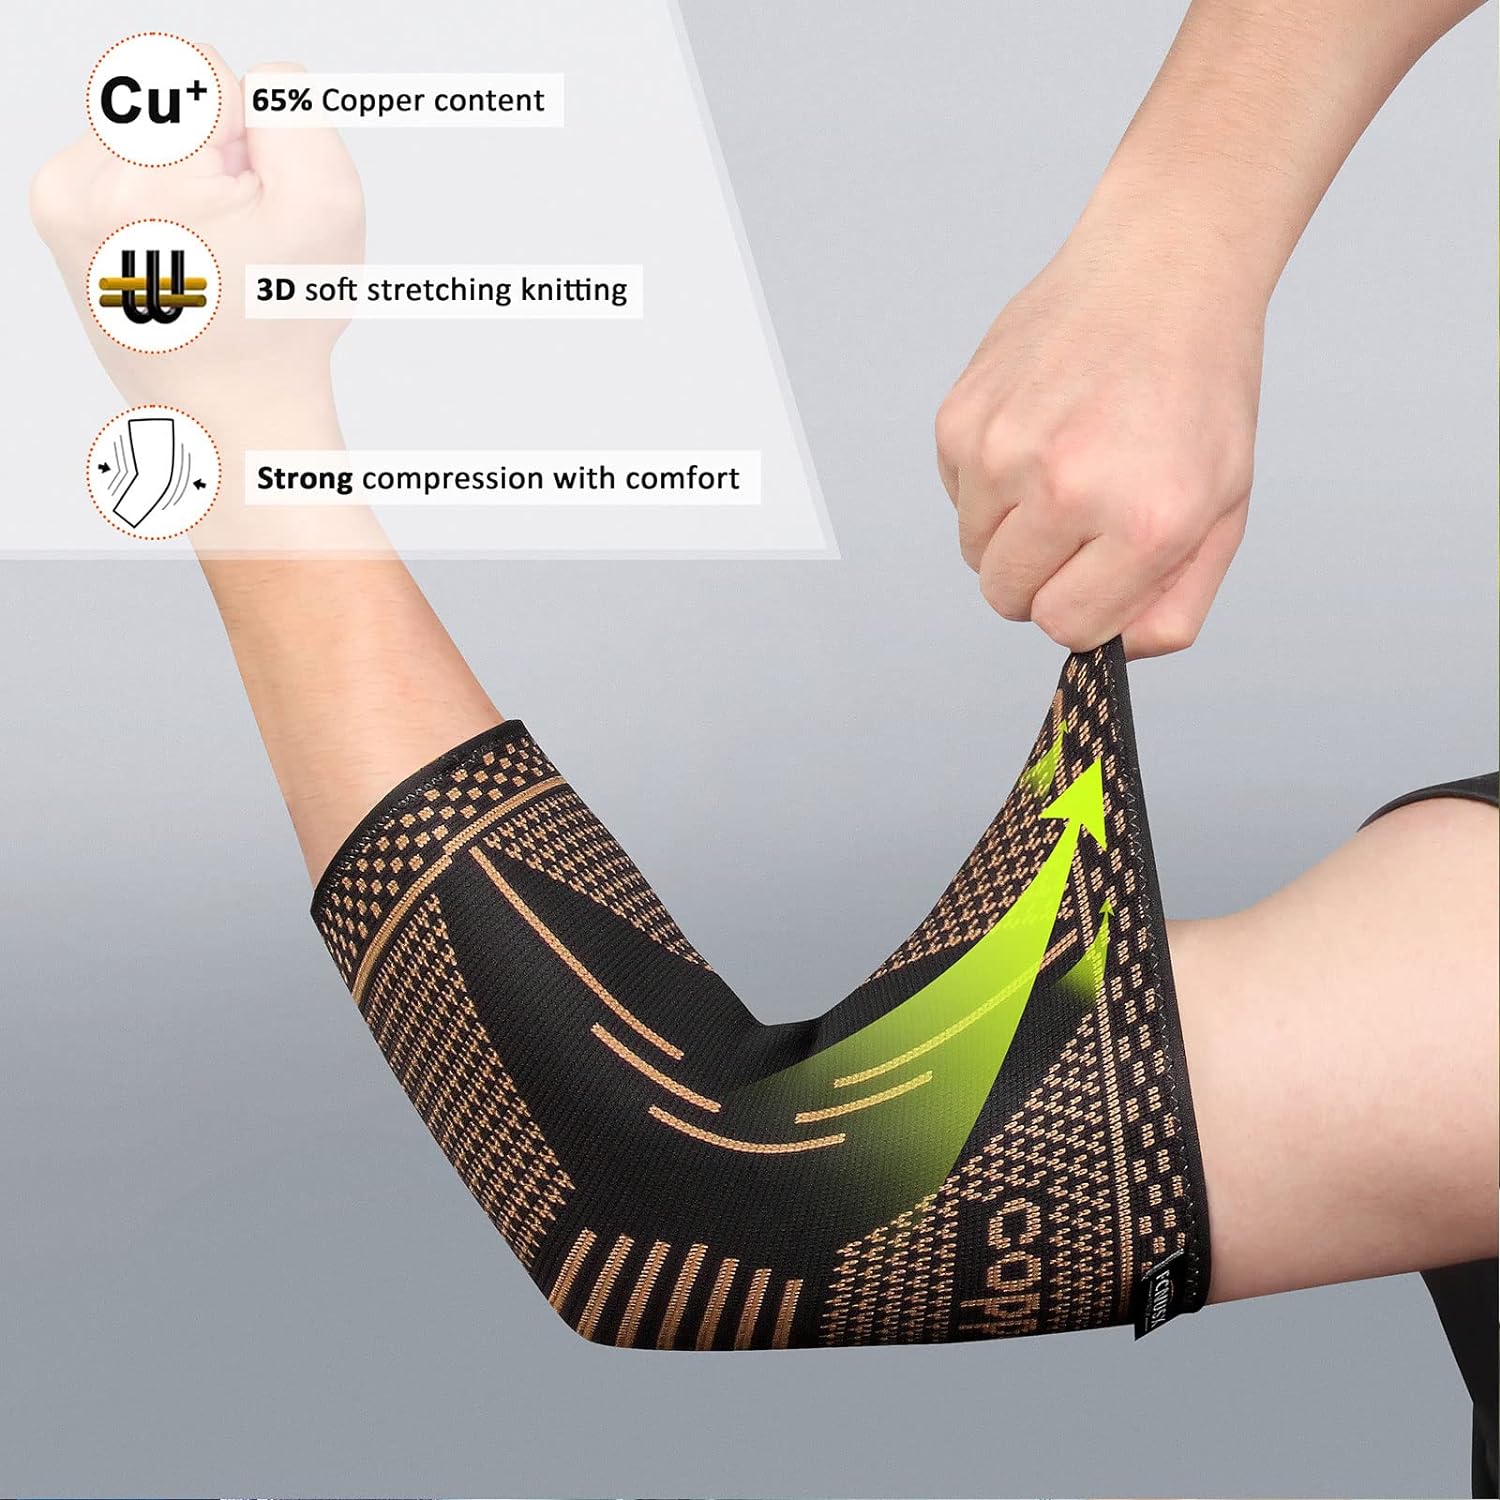 FCNUSX Copper Elbow Brace Compression Sleeve for Pain Relief Men  Women, Arm Support Sleeves Forearm Pain Relief Pads Braces